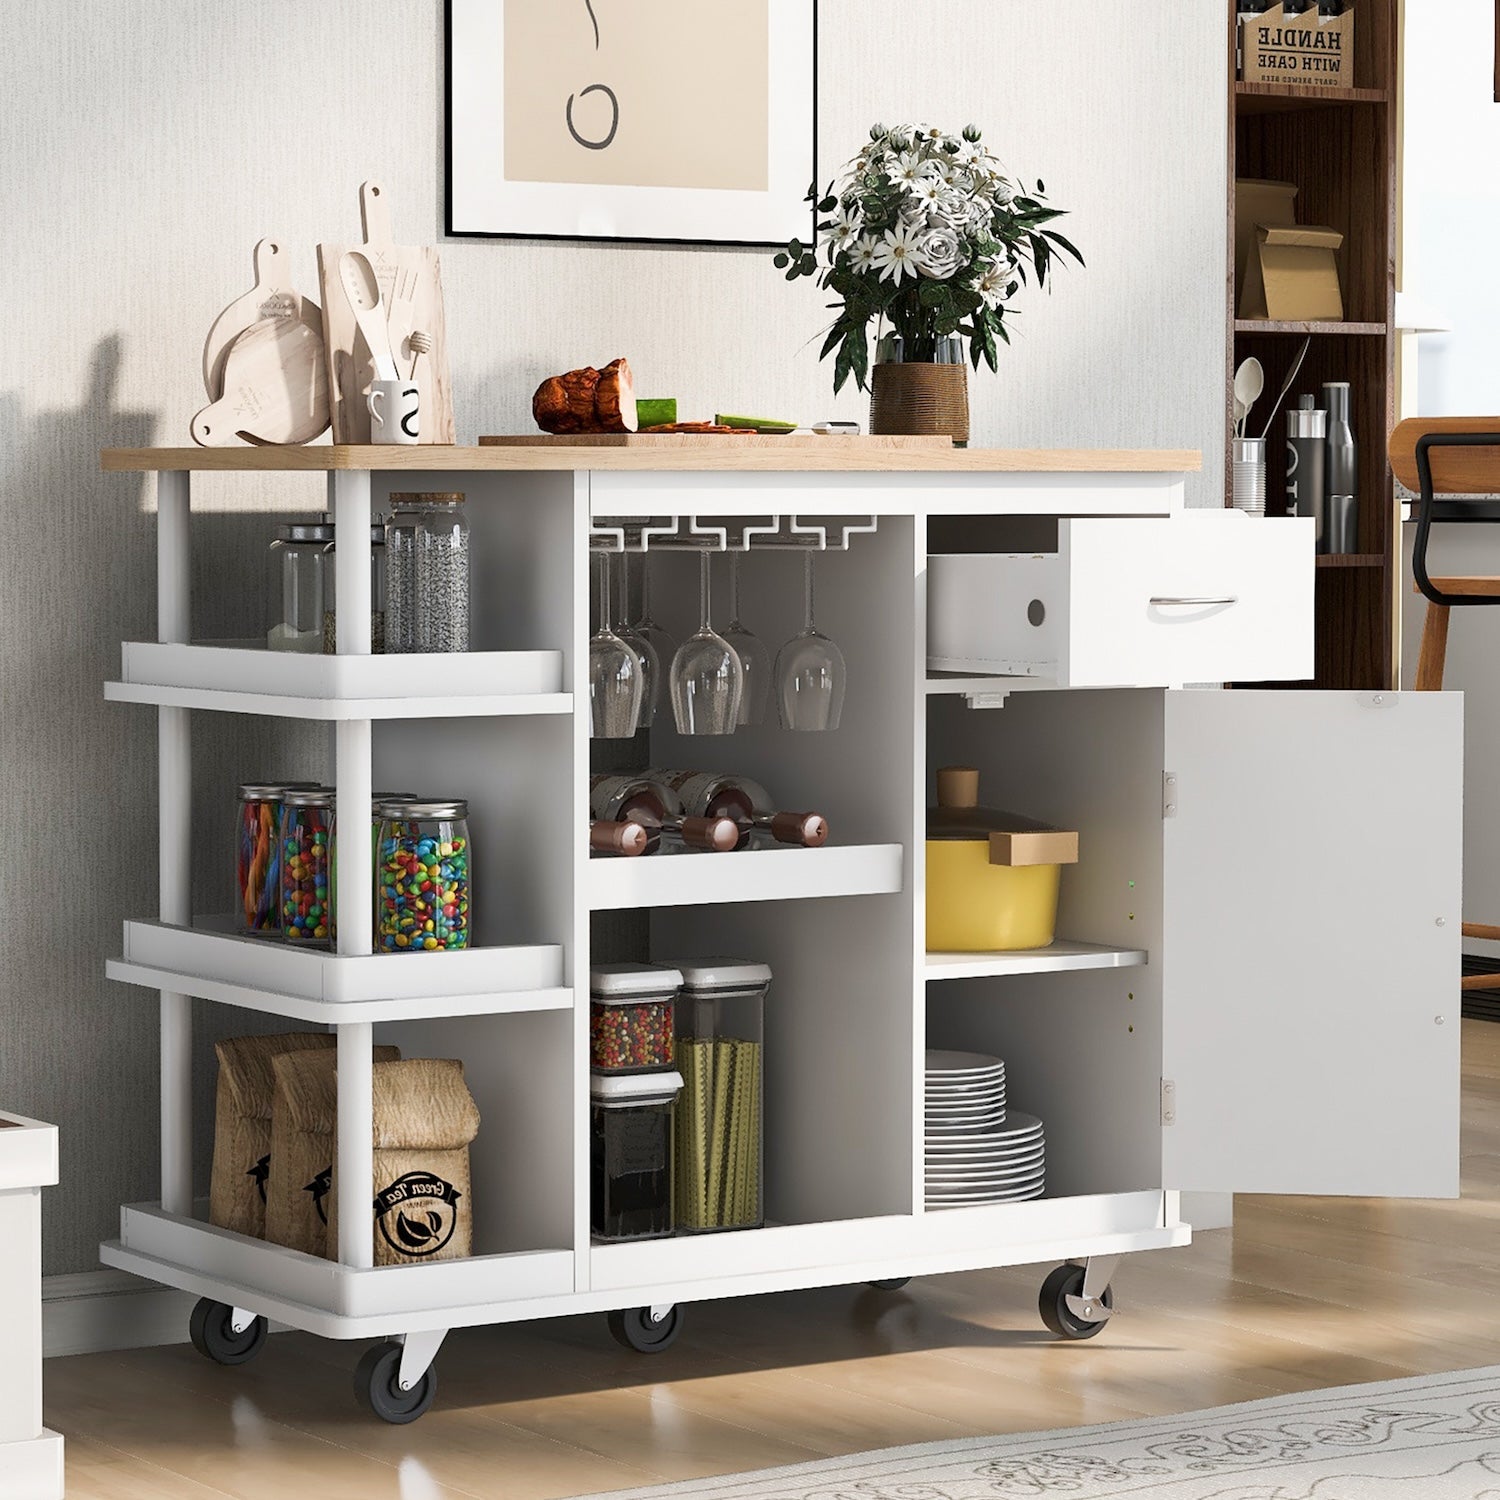 K&K Kitchen Island Cart with 2 Drawers & Open Shelves - White